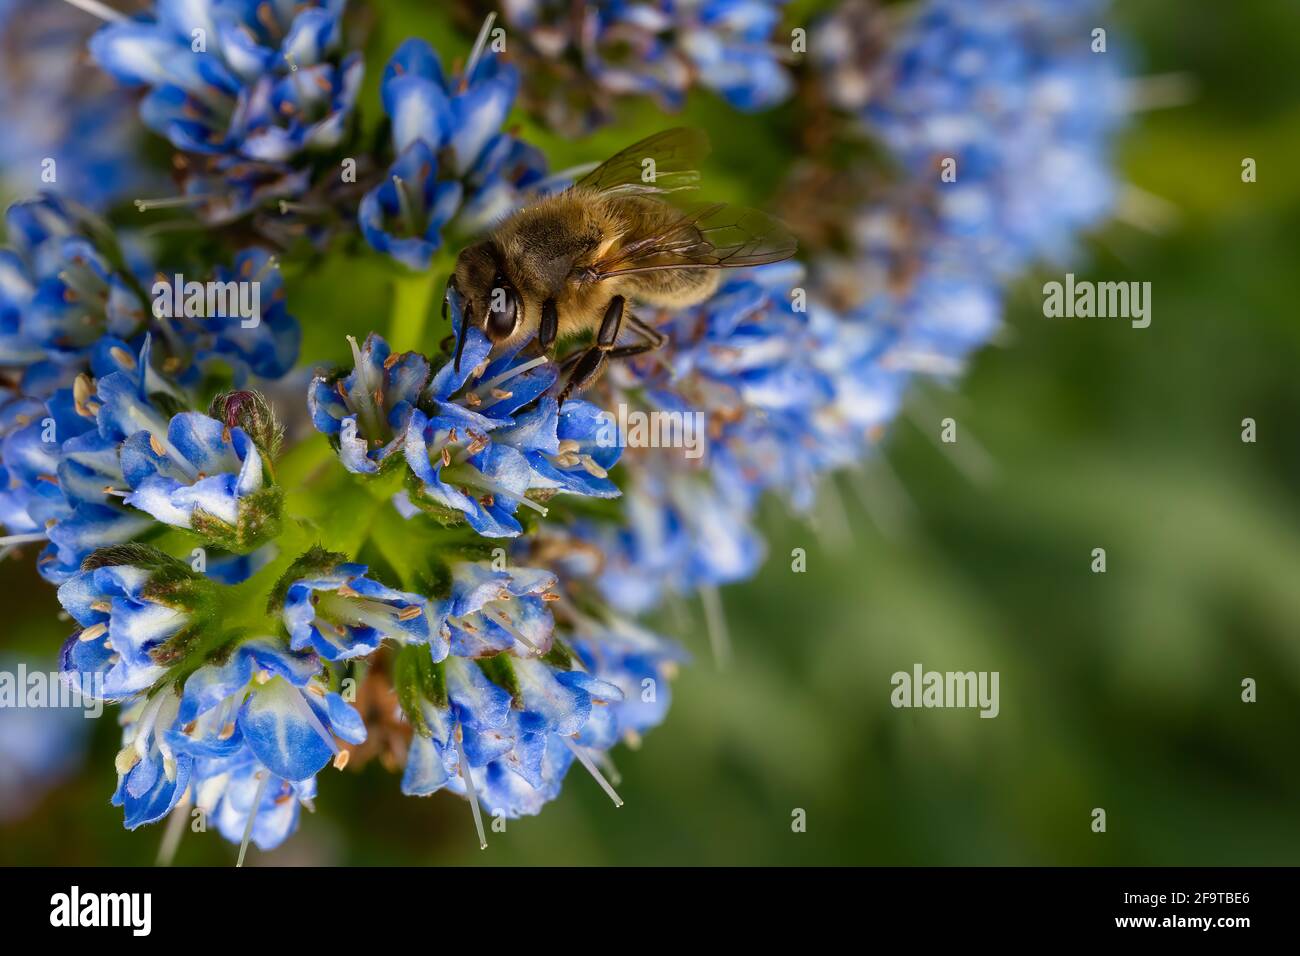 Bee in close-up on a large blue flower Echium candicans Fastuosum on a green blurred background Stock Photo